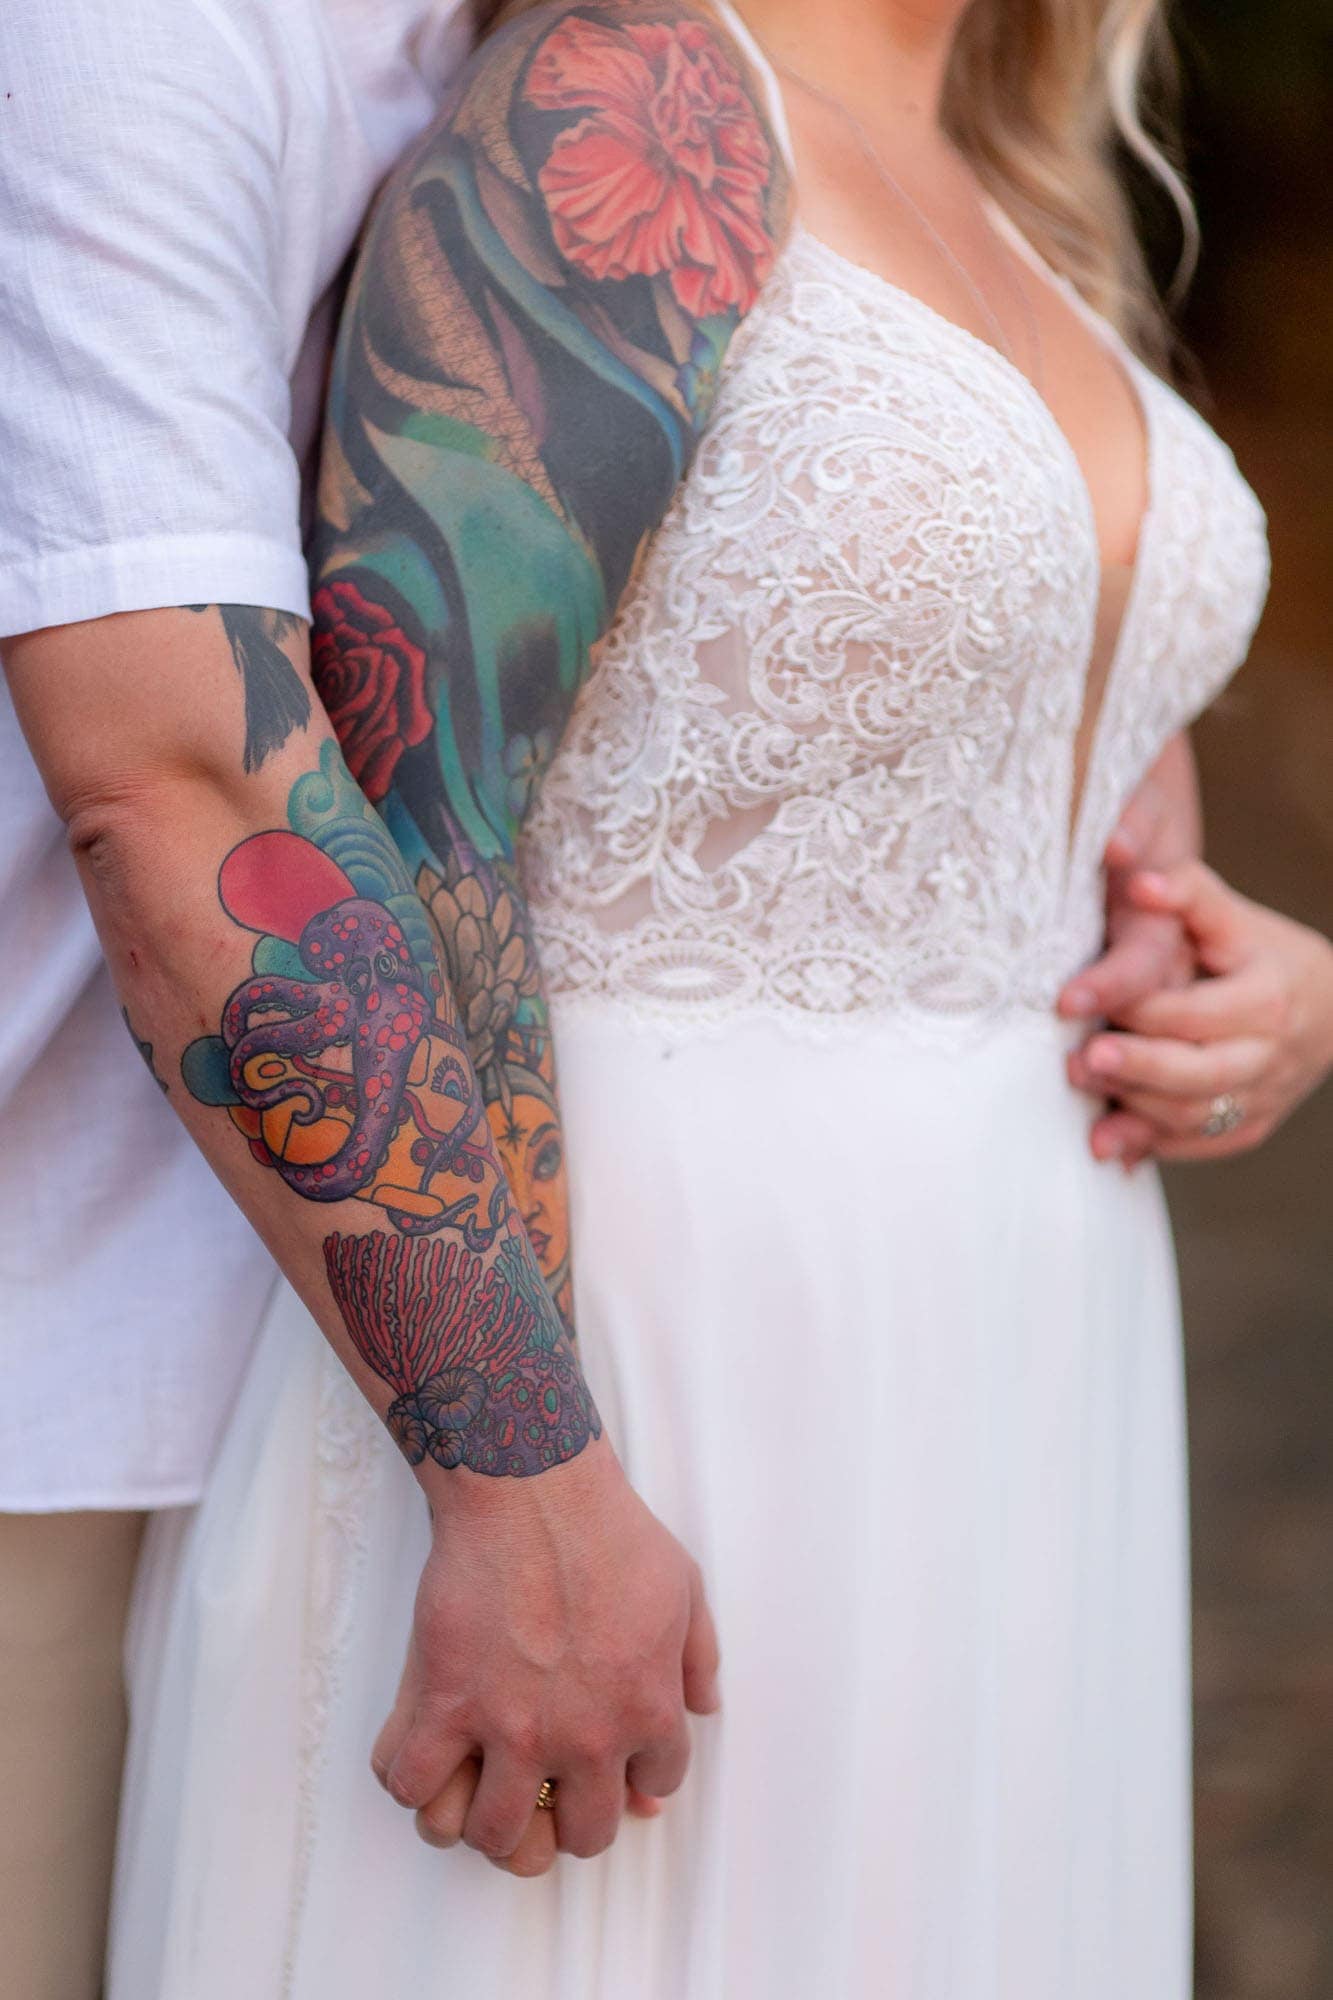 Closeup of the bride and groom's tat sleeves